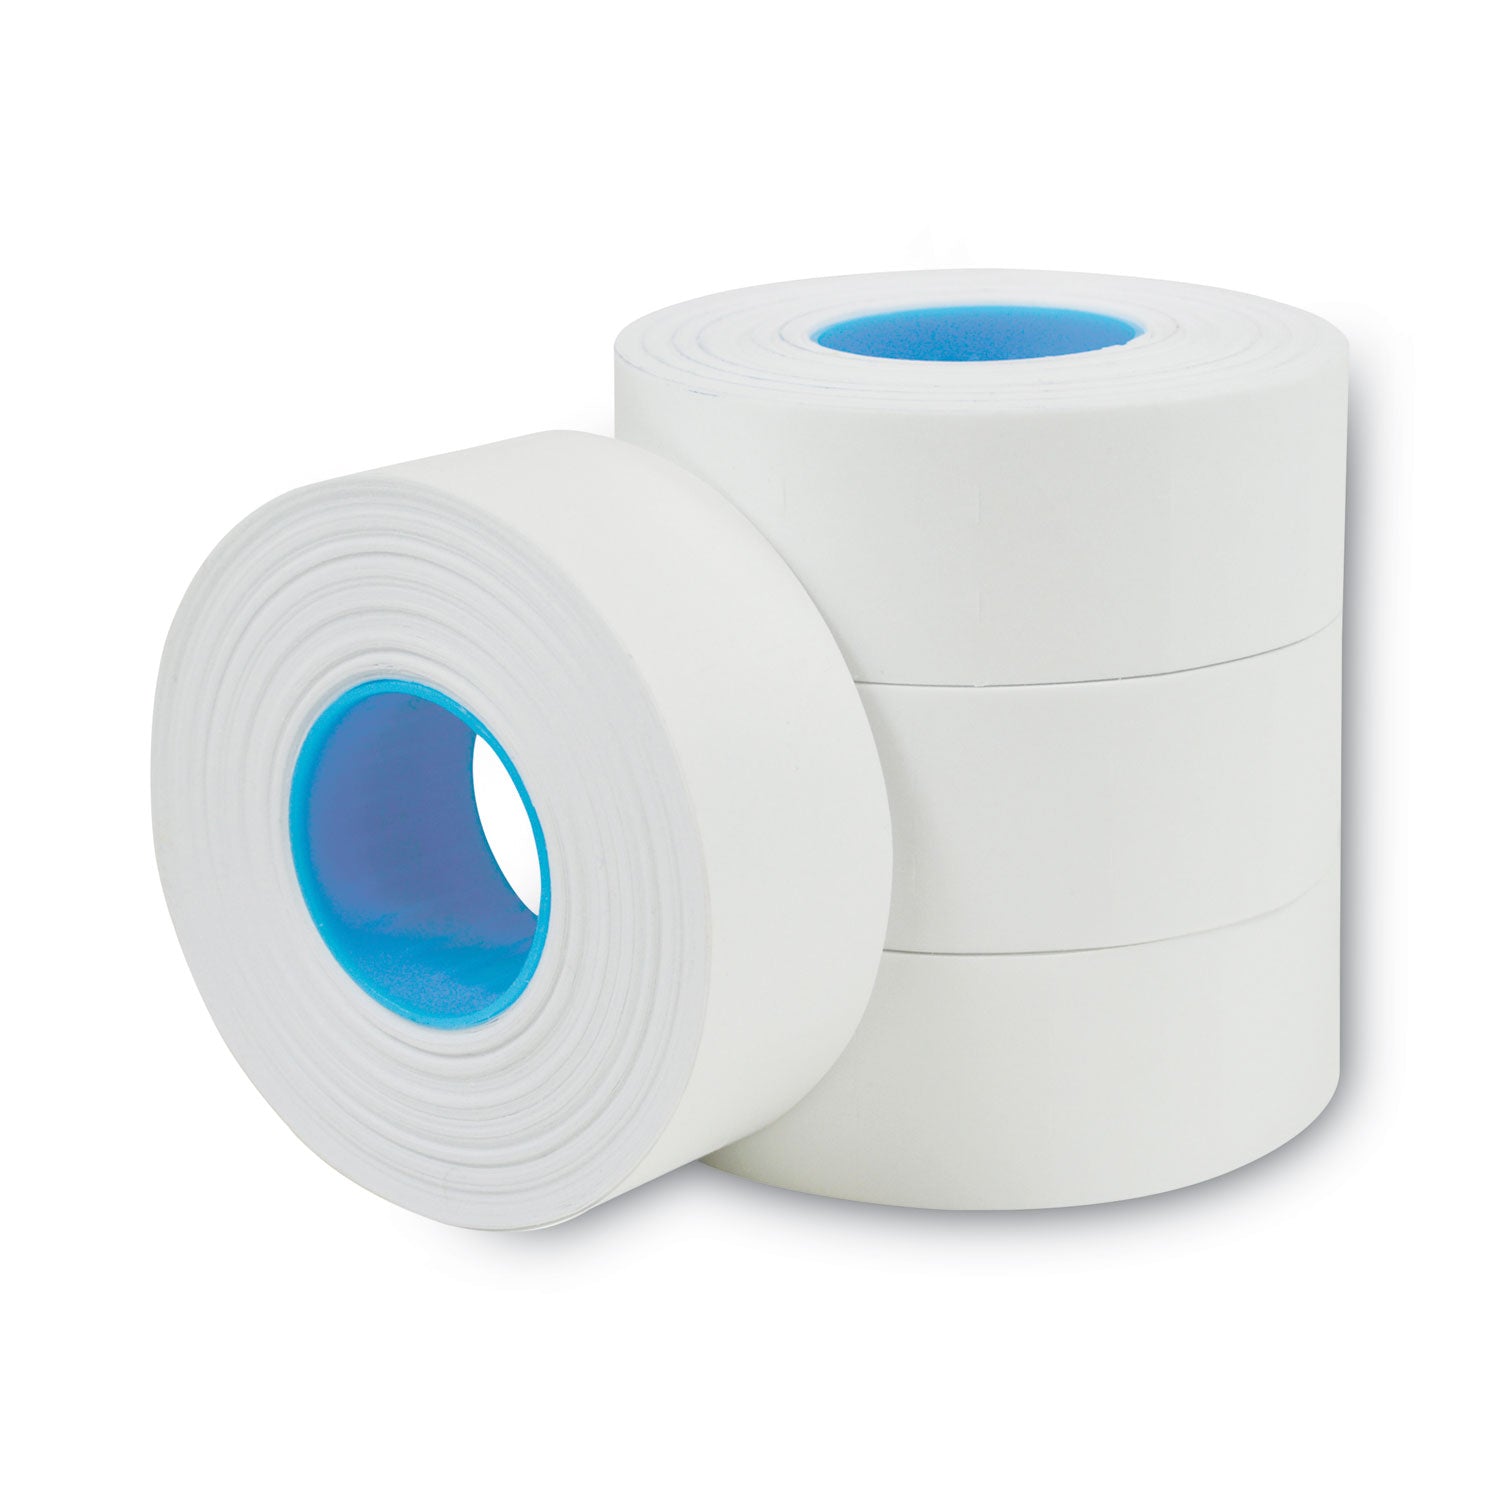 Two-Line Pricemarker Labels, 0.44 x 0.81, White, 1,000/Roll, 3 Rolls/Box - 